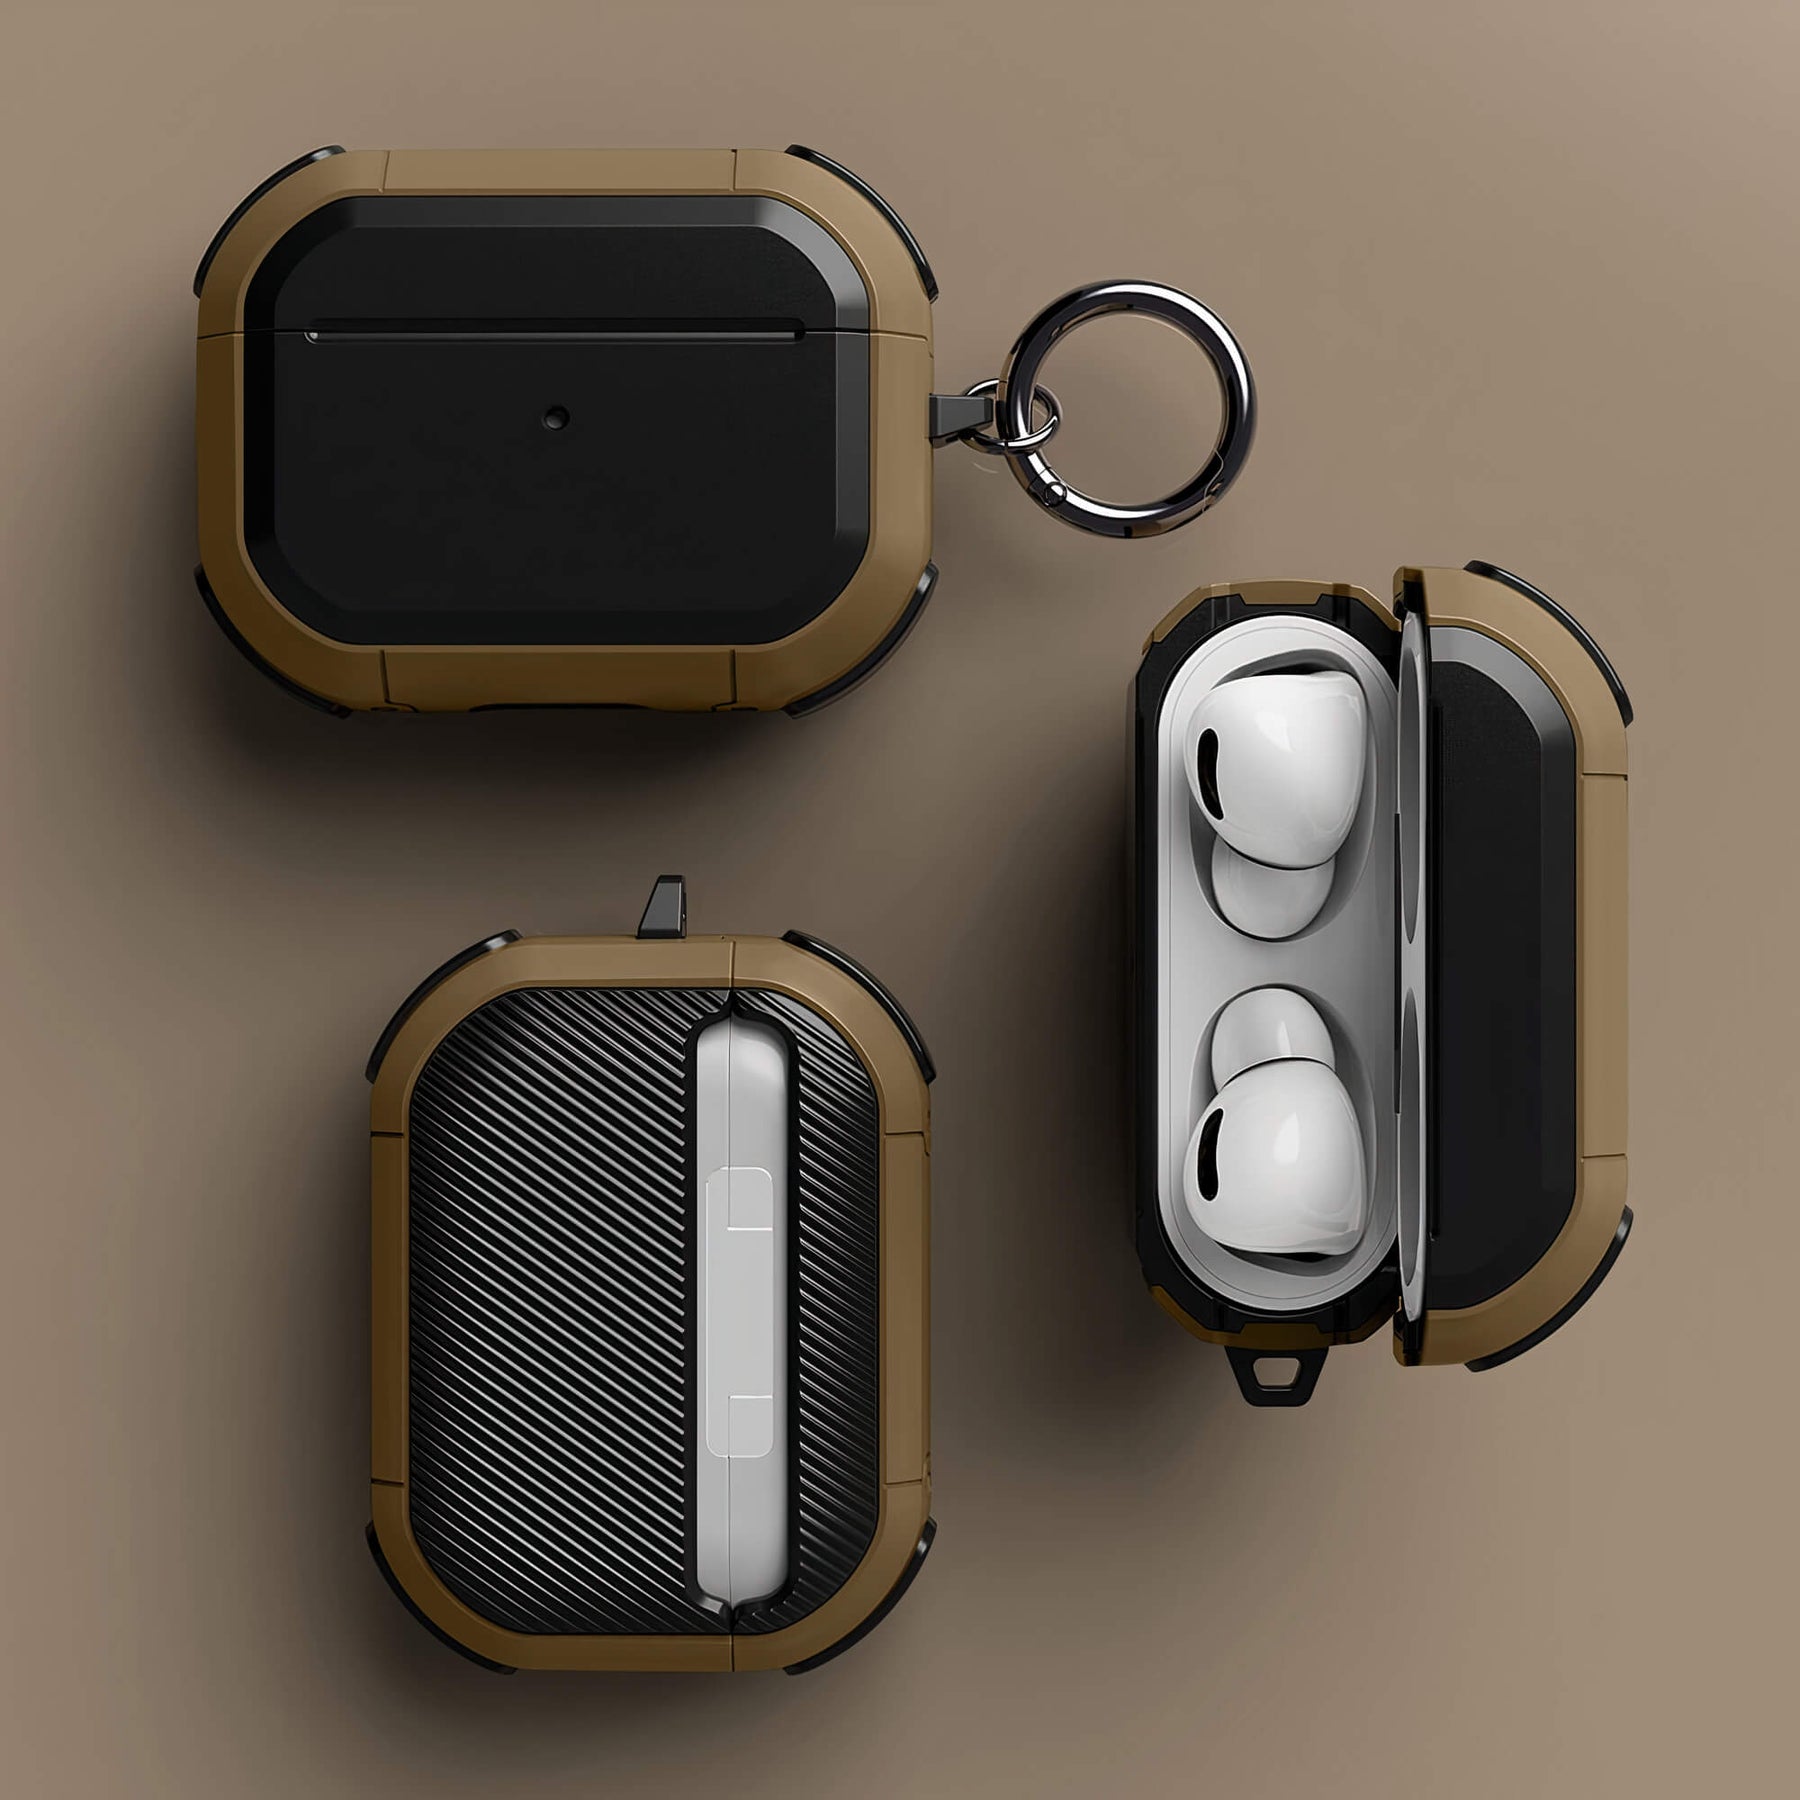 Rugged Airpods Case